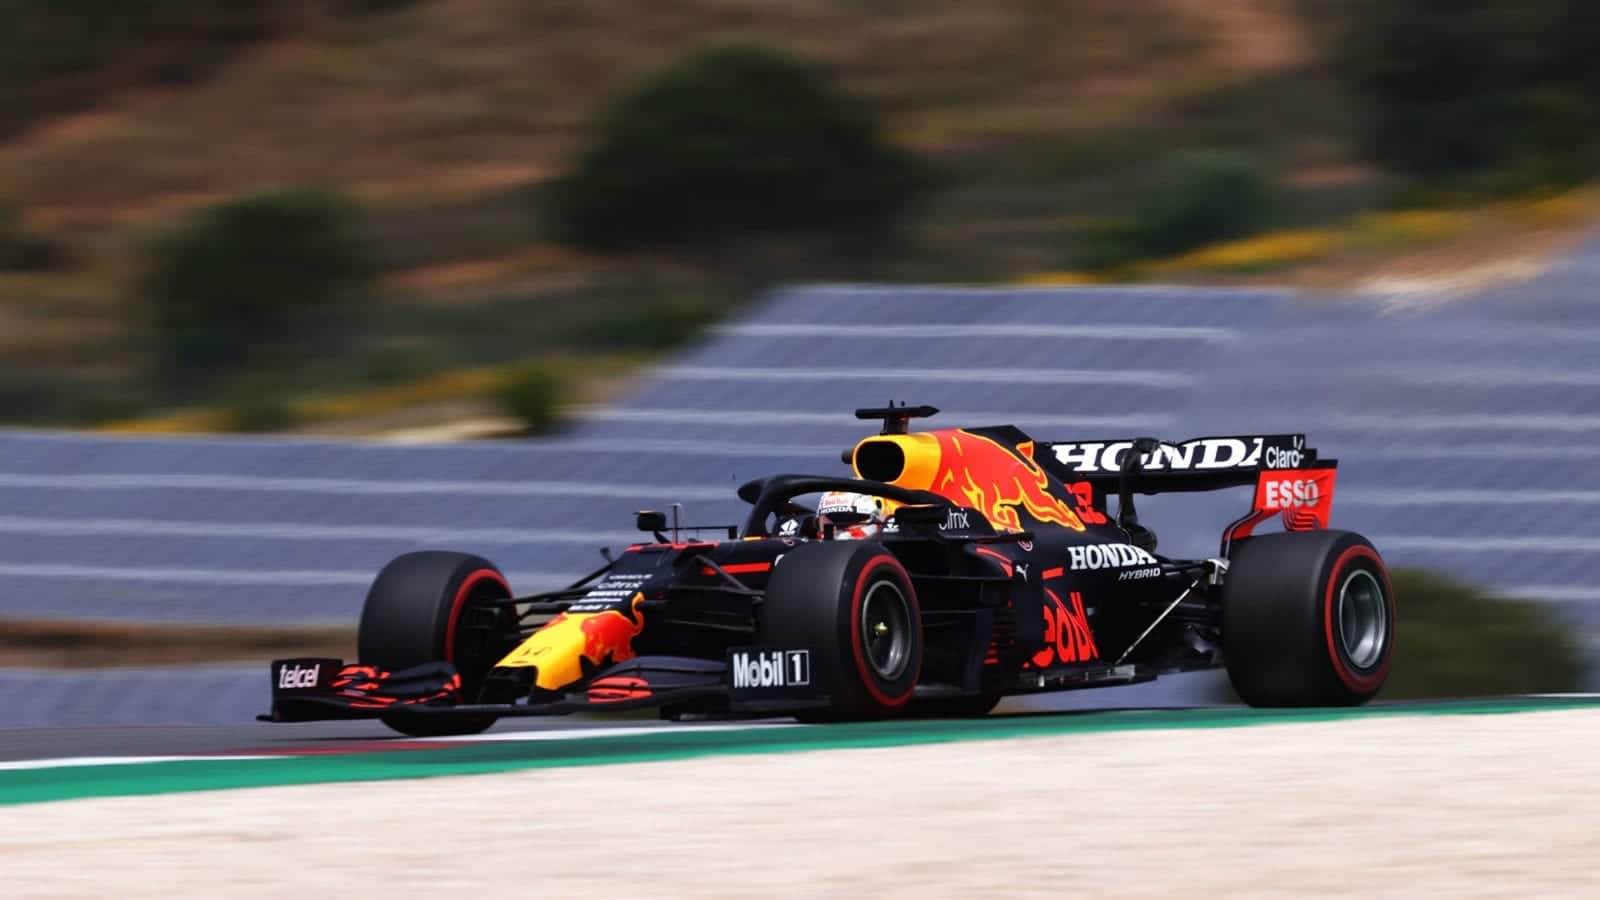 PORTIMAO, PORTUGAL - MAY 01: Max Verstappen of the Netherlands driving the (33) Red Bull Racing RB16B Honda on track during final practice for the F1 Grand Prix of Portugal at Autodromo Internacional Do Algarve on May 01, 2021 in Portimao, Portugal. (Photo by Lars Baron/Getty Images)